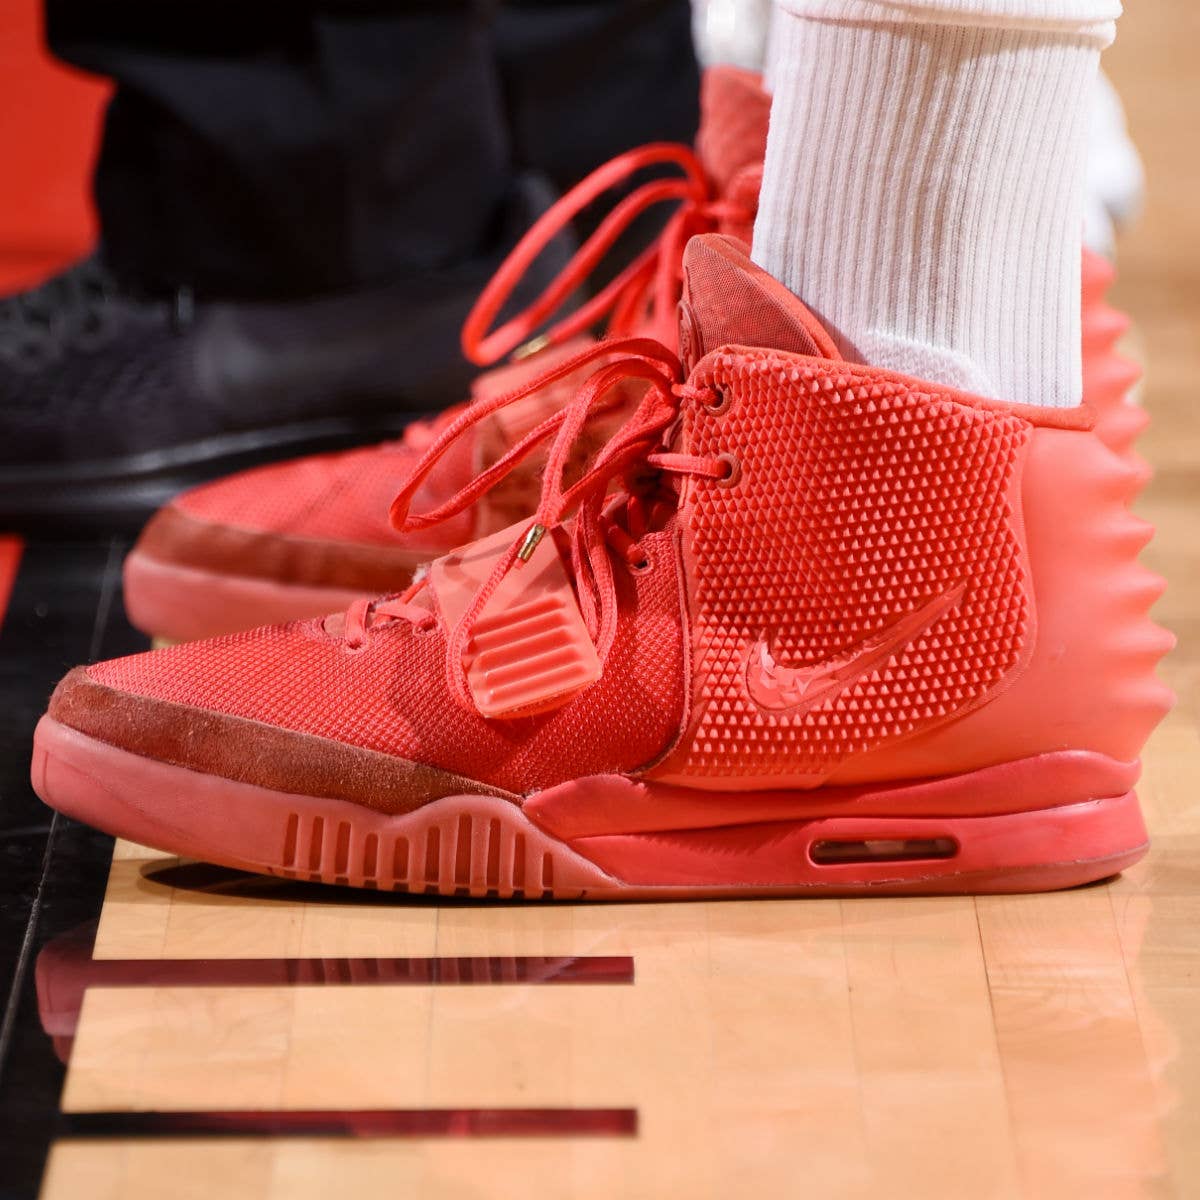 Detectable Ver a través de Muelle del puente SoleWatch: P.J. Tucker Plays in 'Red October' Nike Yeezys Again | Complex